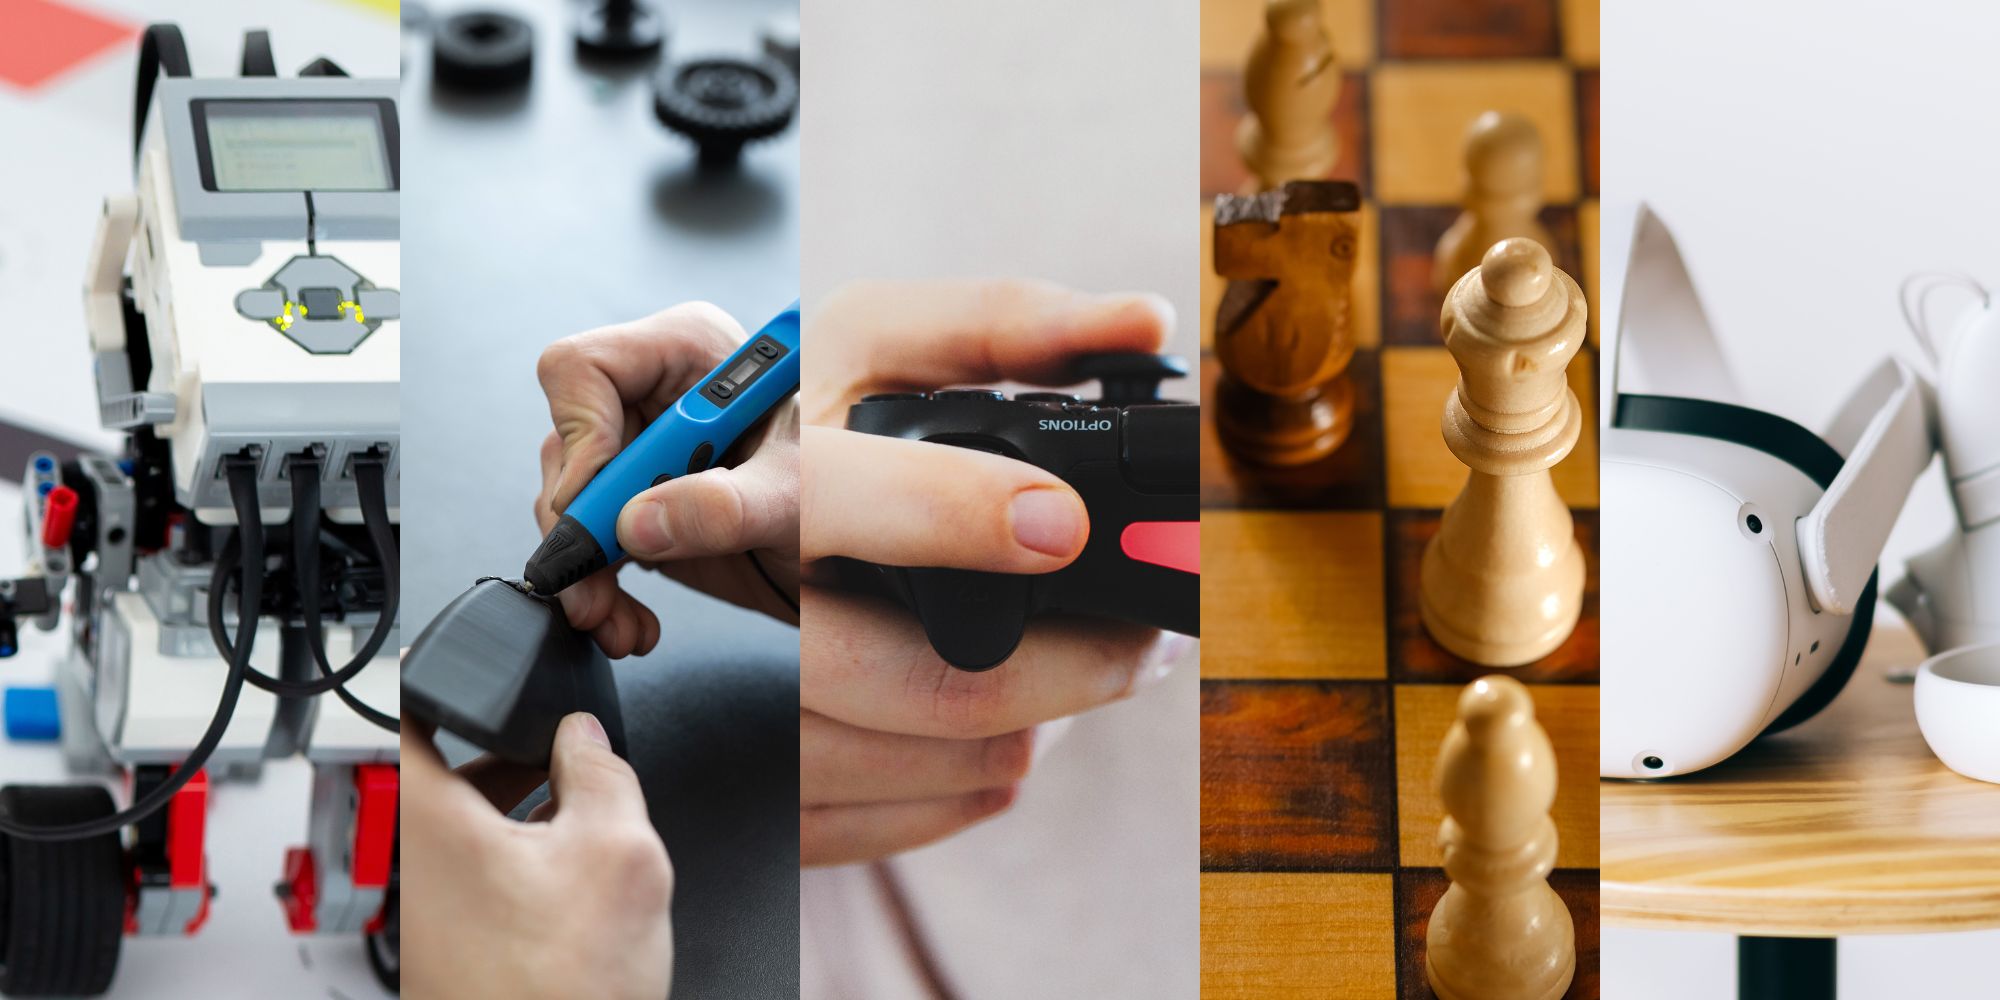 Stock Imagery featuring a Robots, a 3D pen, a videogame controller, chess, and a VR Set